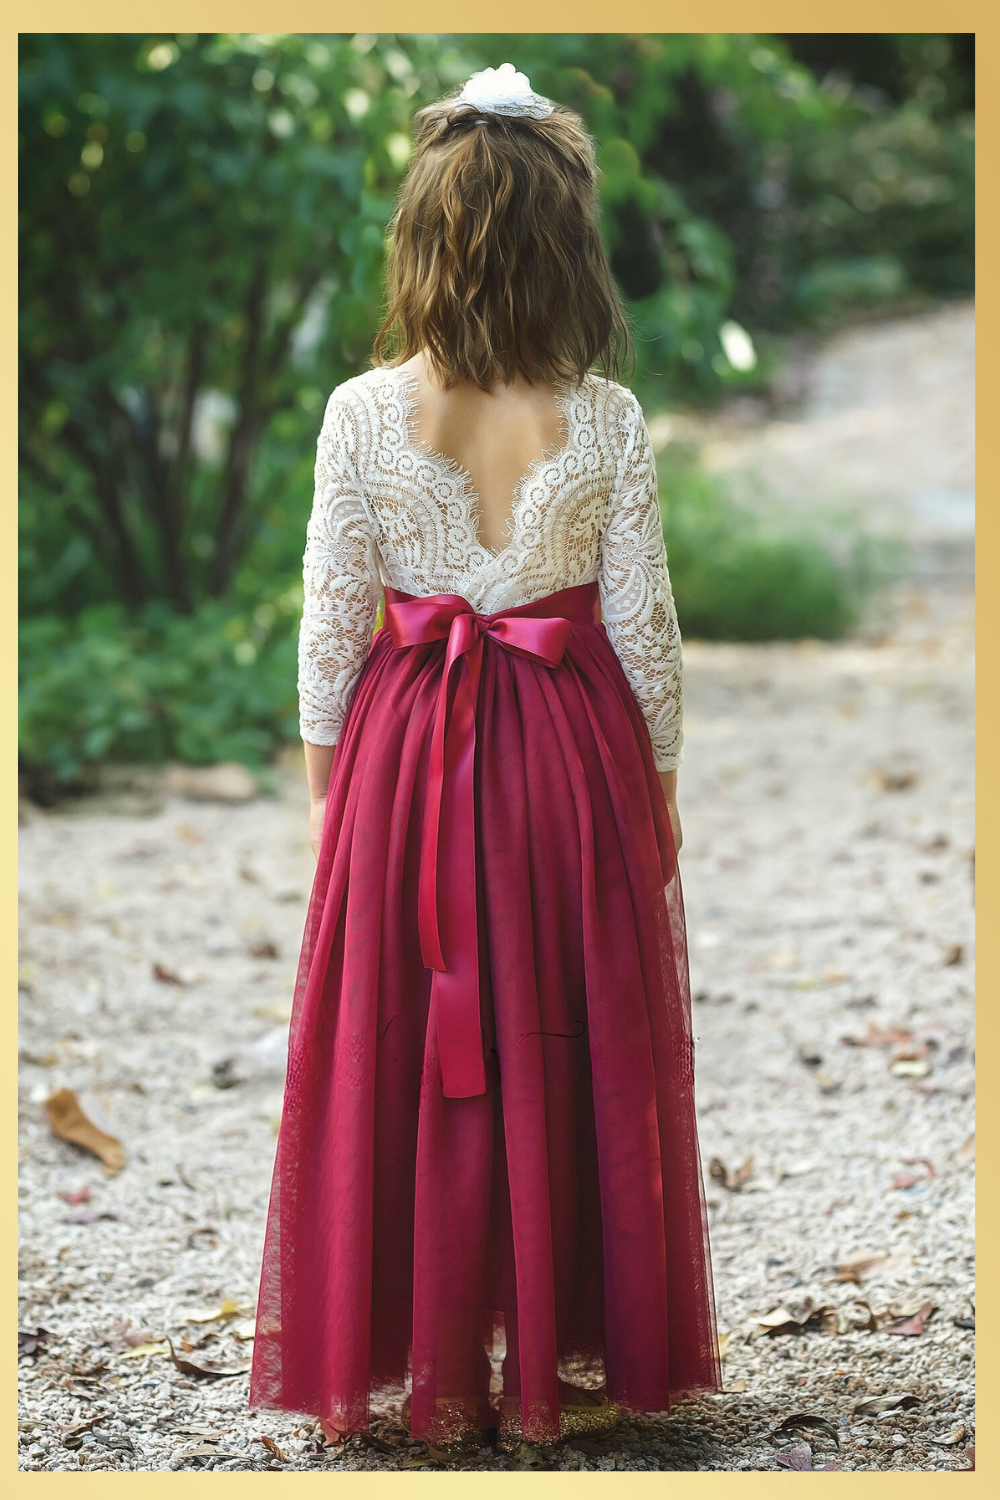 flower girl dress in burgundy tulle and white lace. 